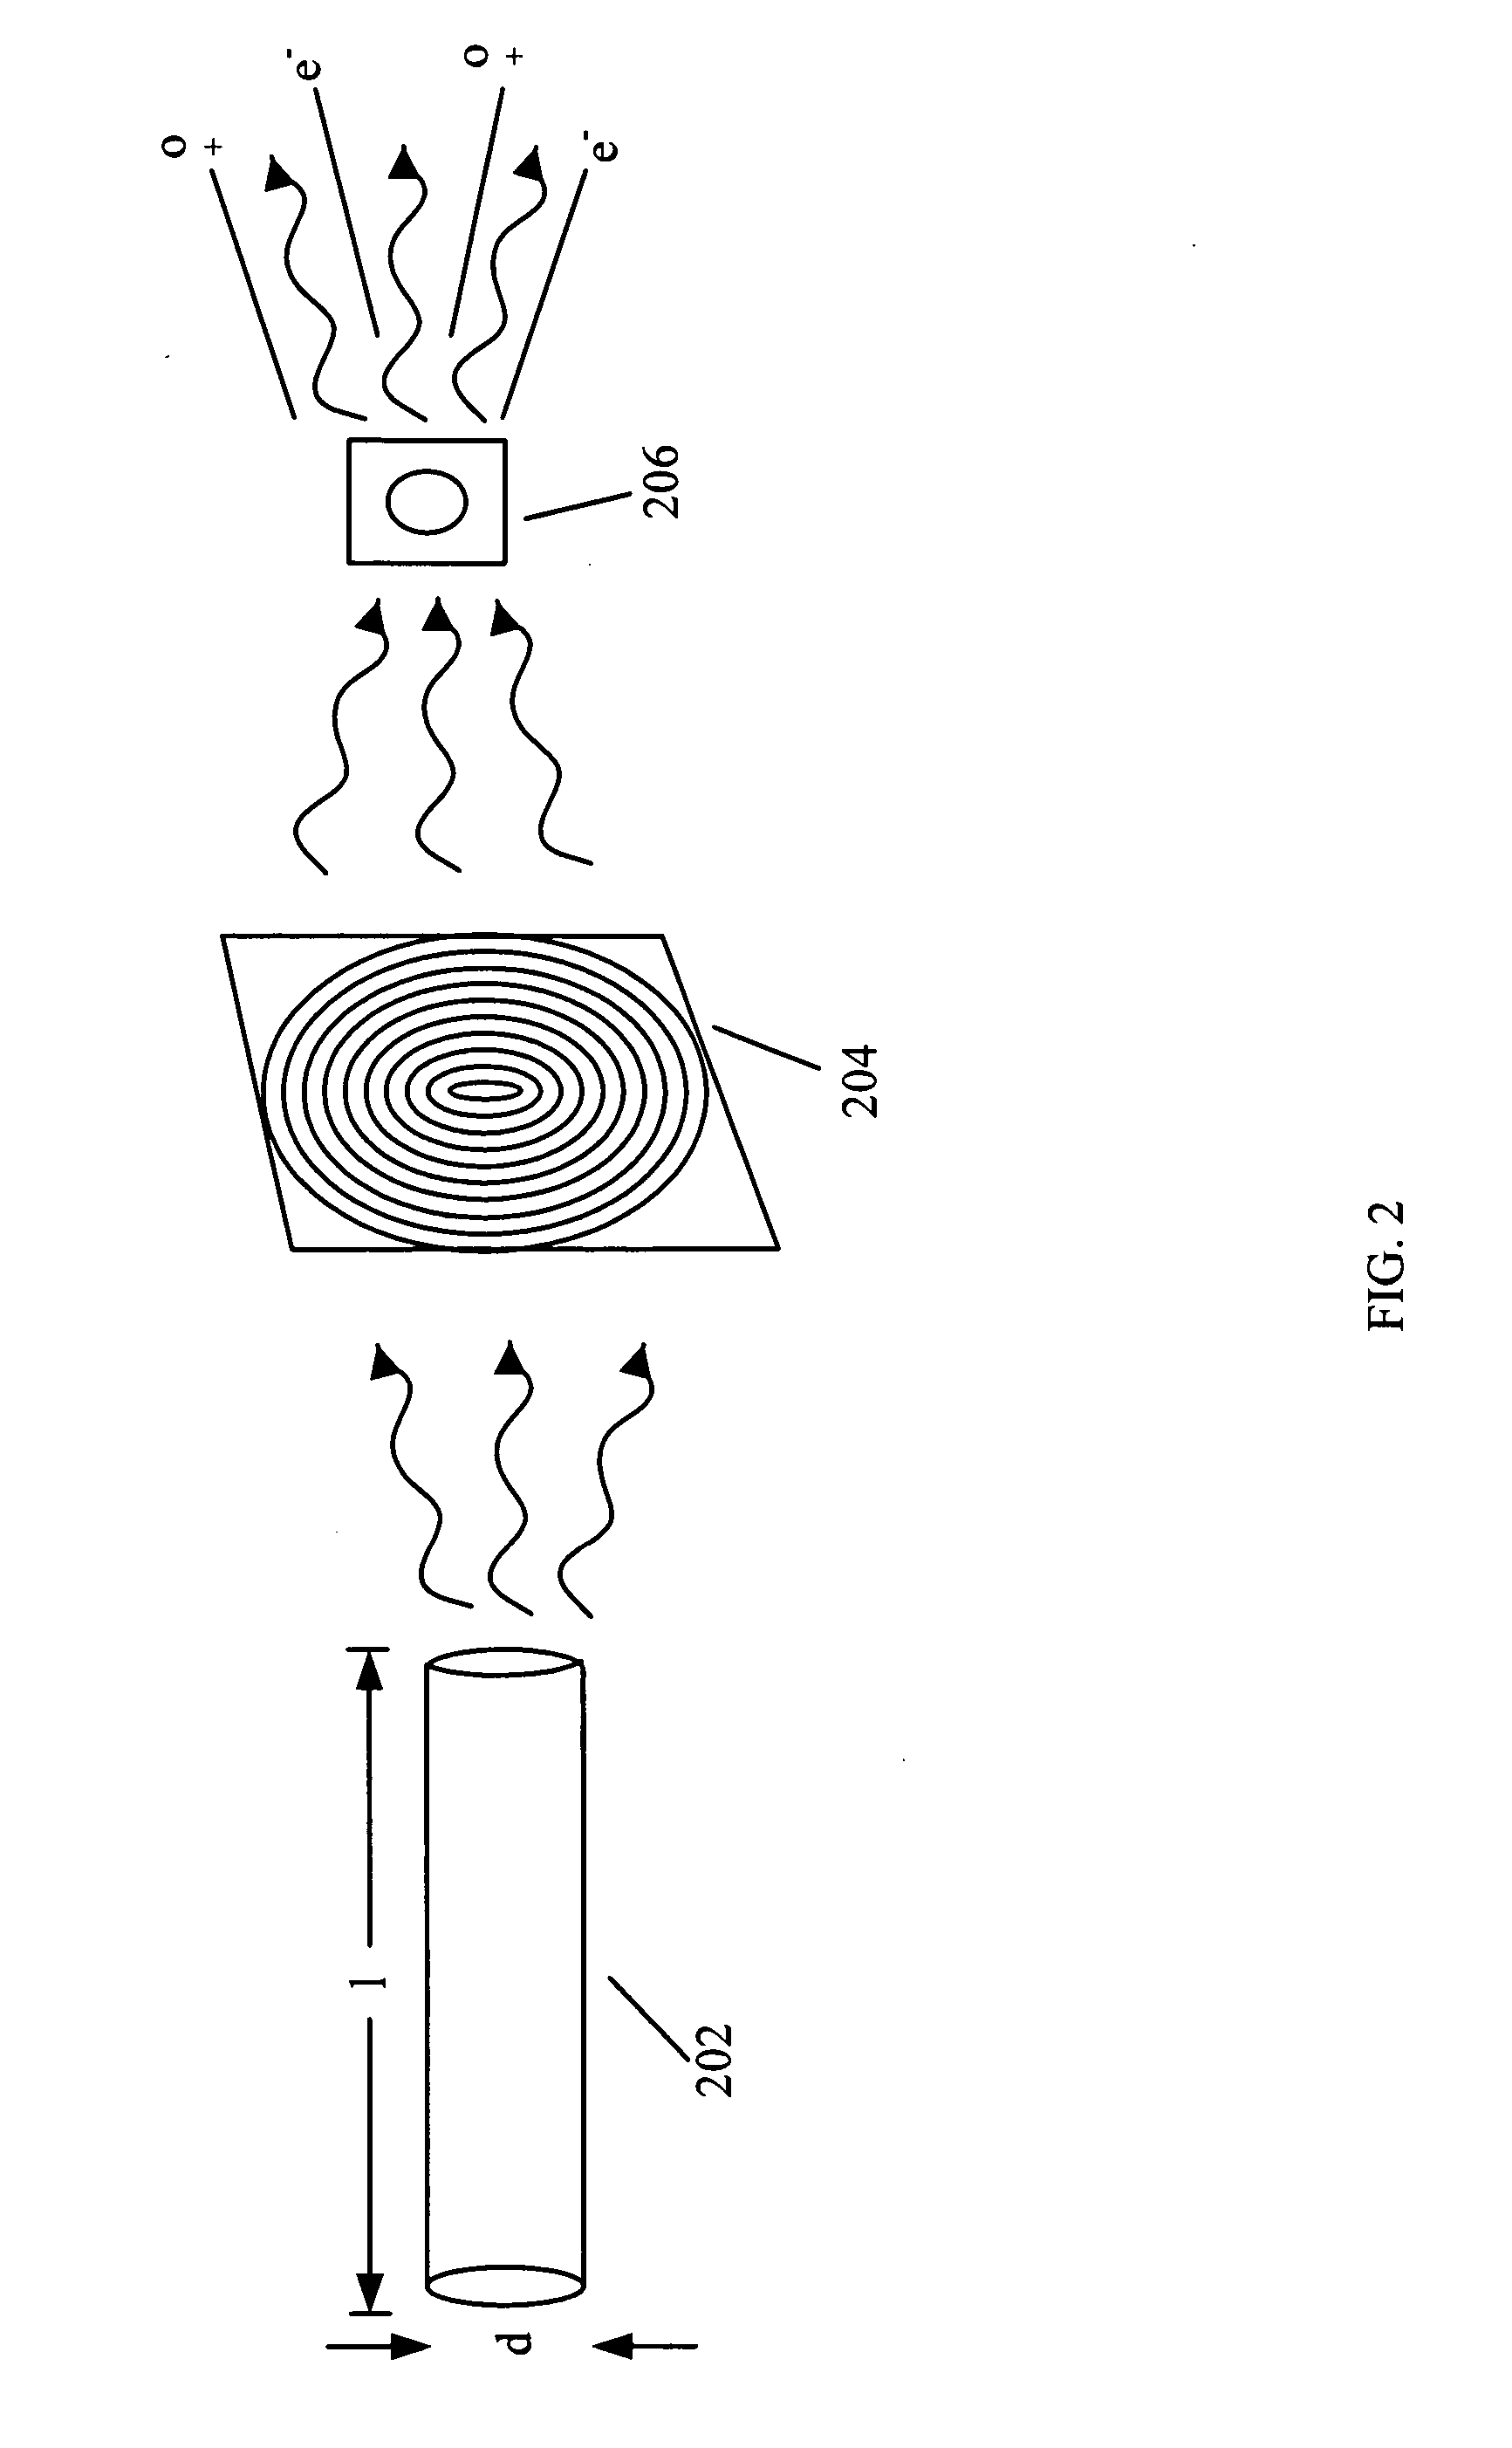 Method and apparatus for nanoscale surface analysis using soft X-rays